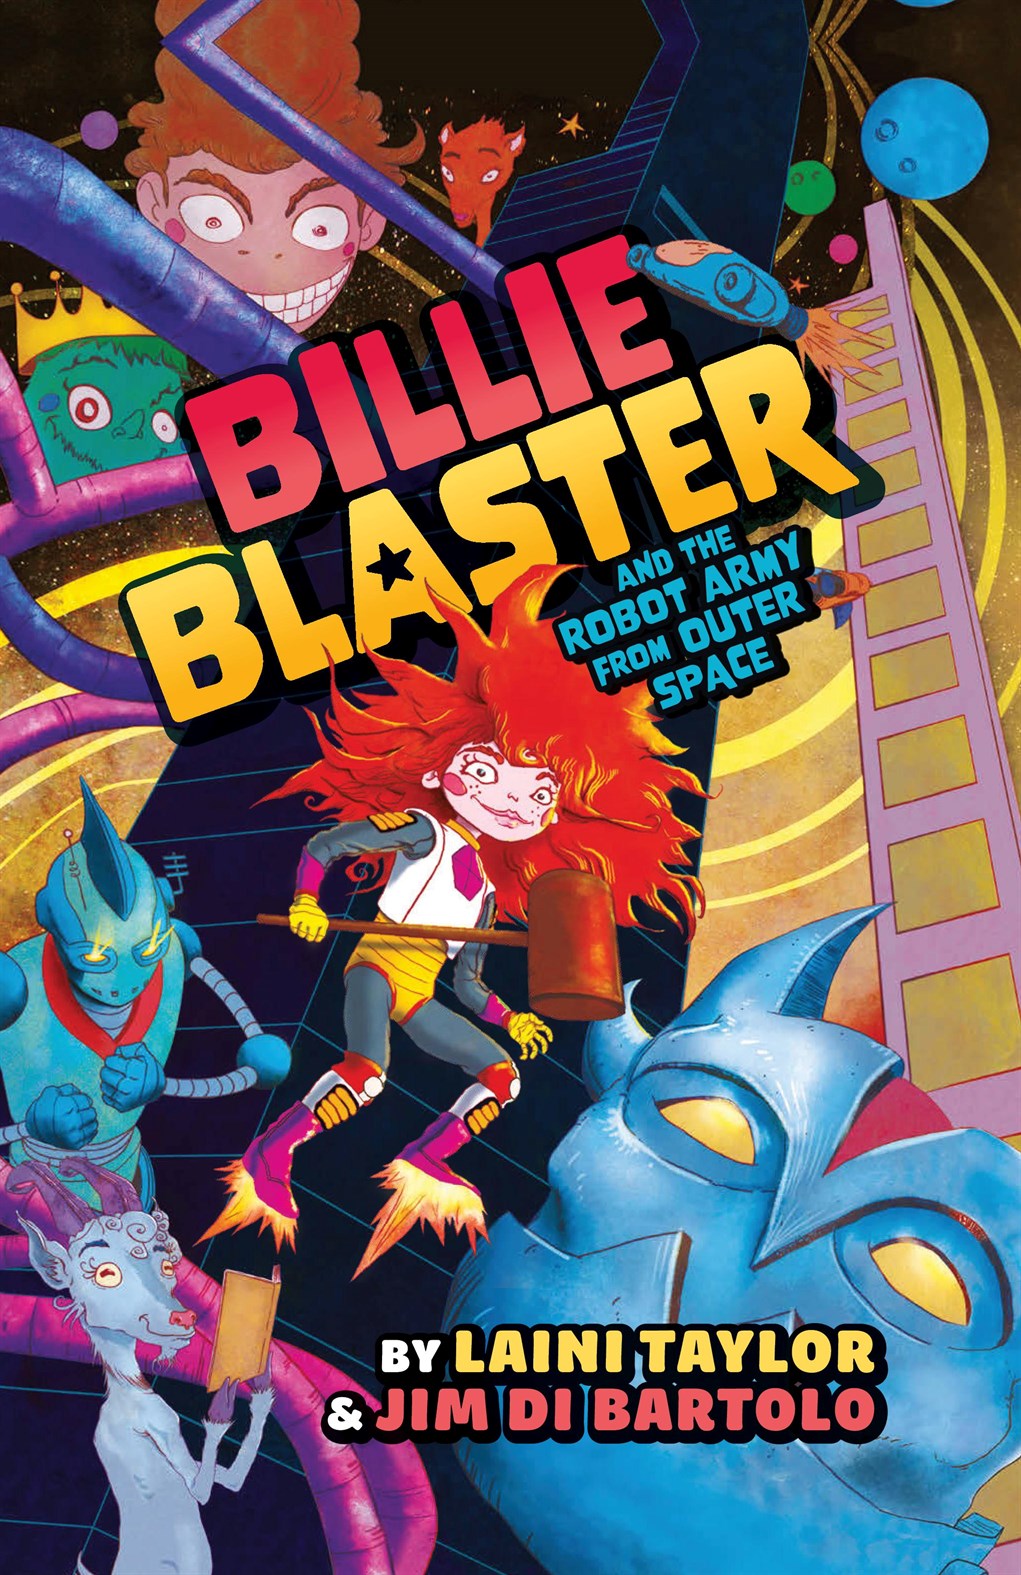 Read online Billie Blaster and the Robot Army From Outer Space comic -  Issue # TPB (Part 1) - 1